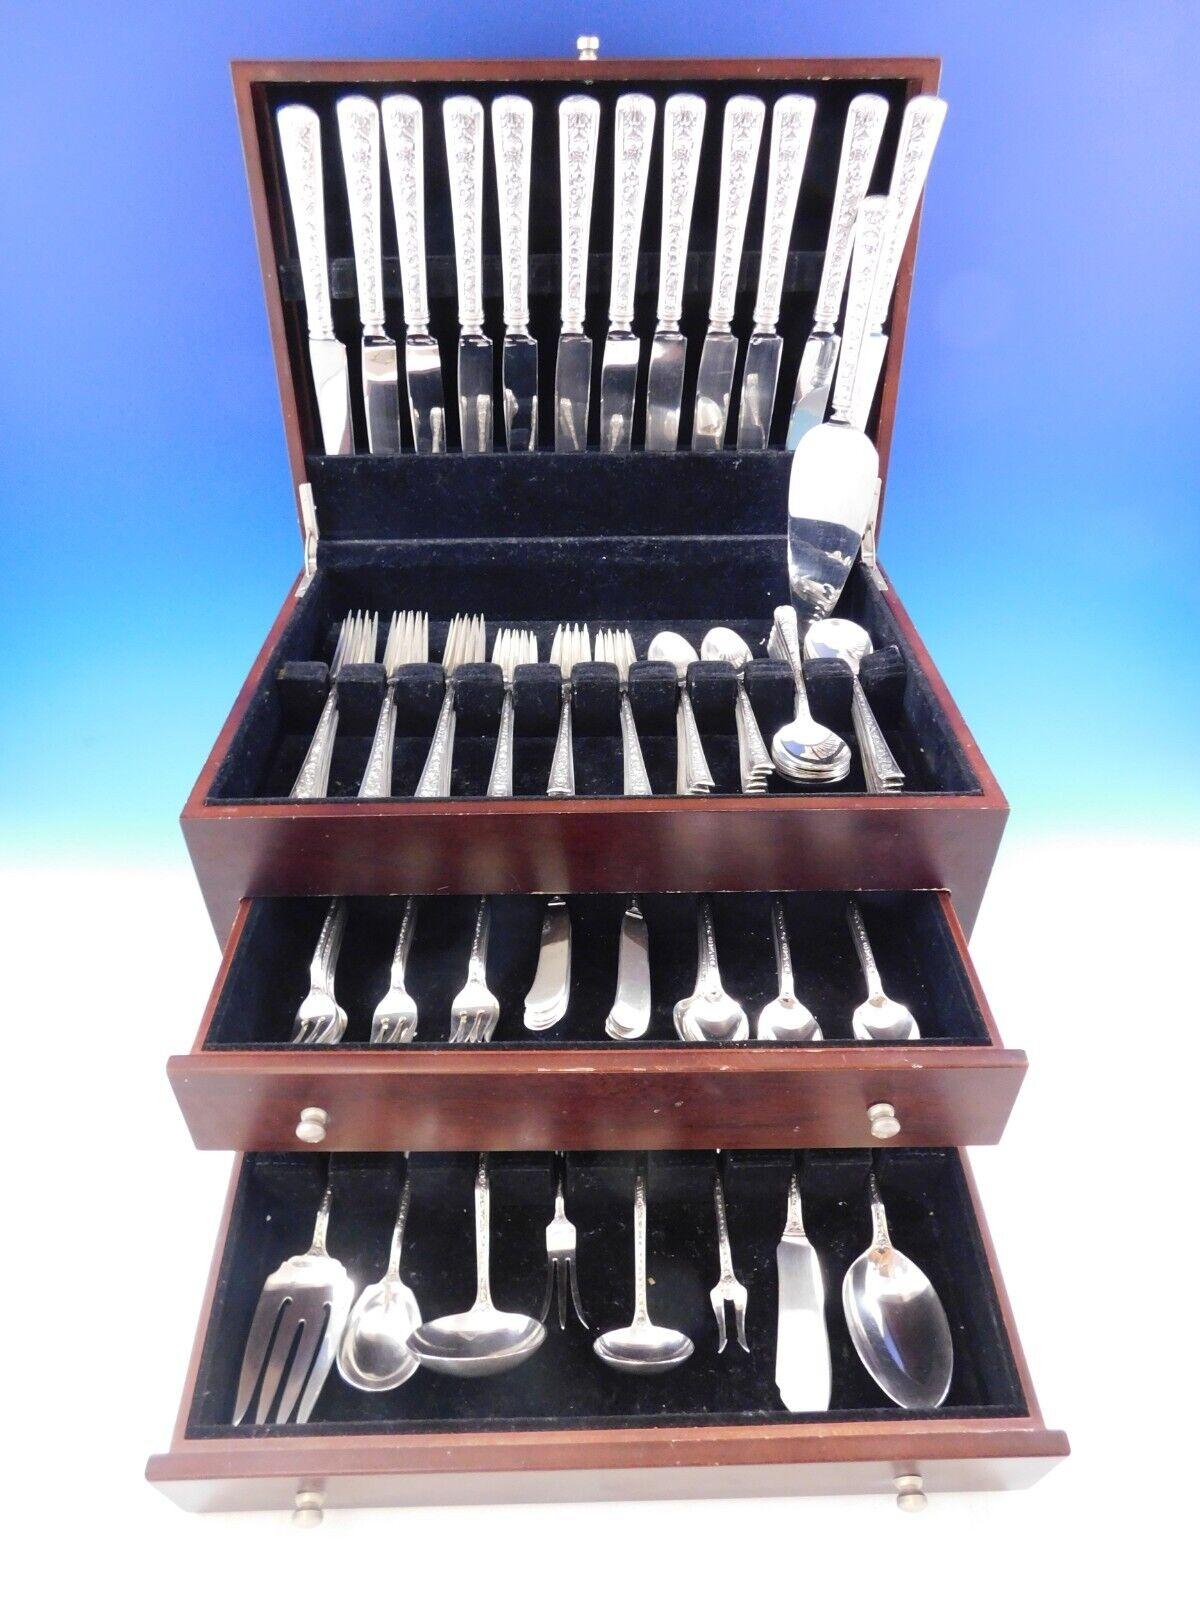 Superb dinner size Windsor Rose by Watson Sterling Silver Flatware set - 105 pieces. This set includes:

12 Dinner Size Knives, 10